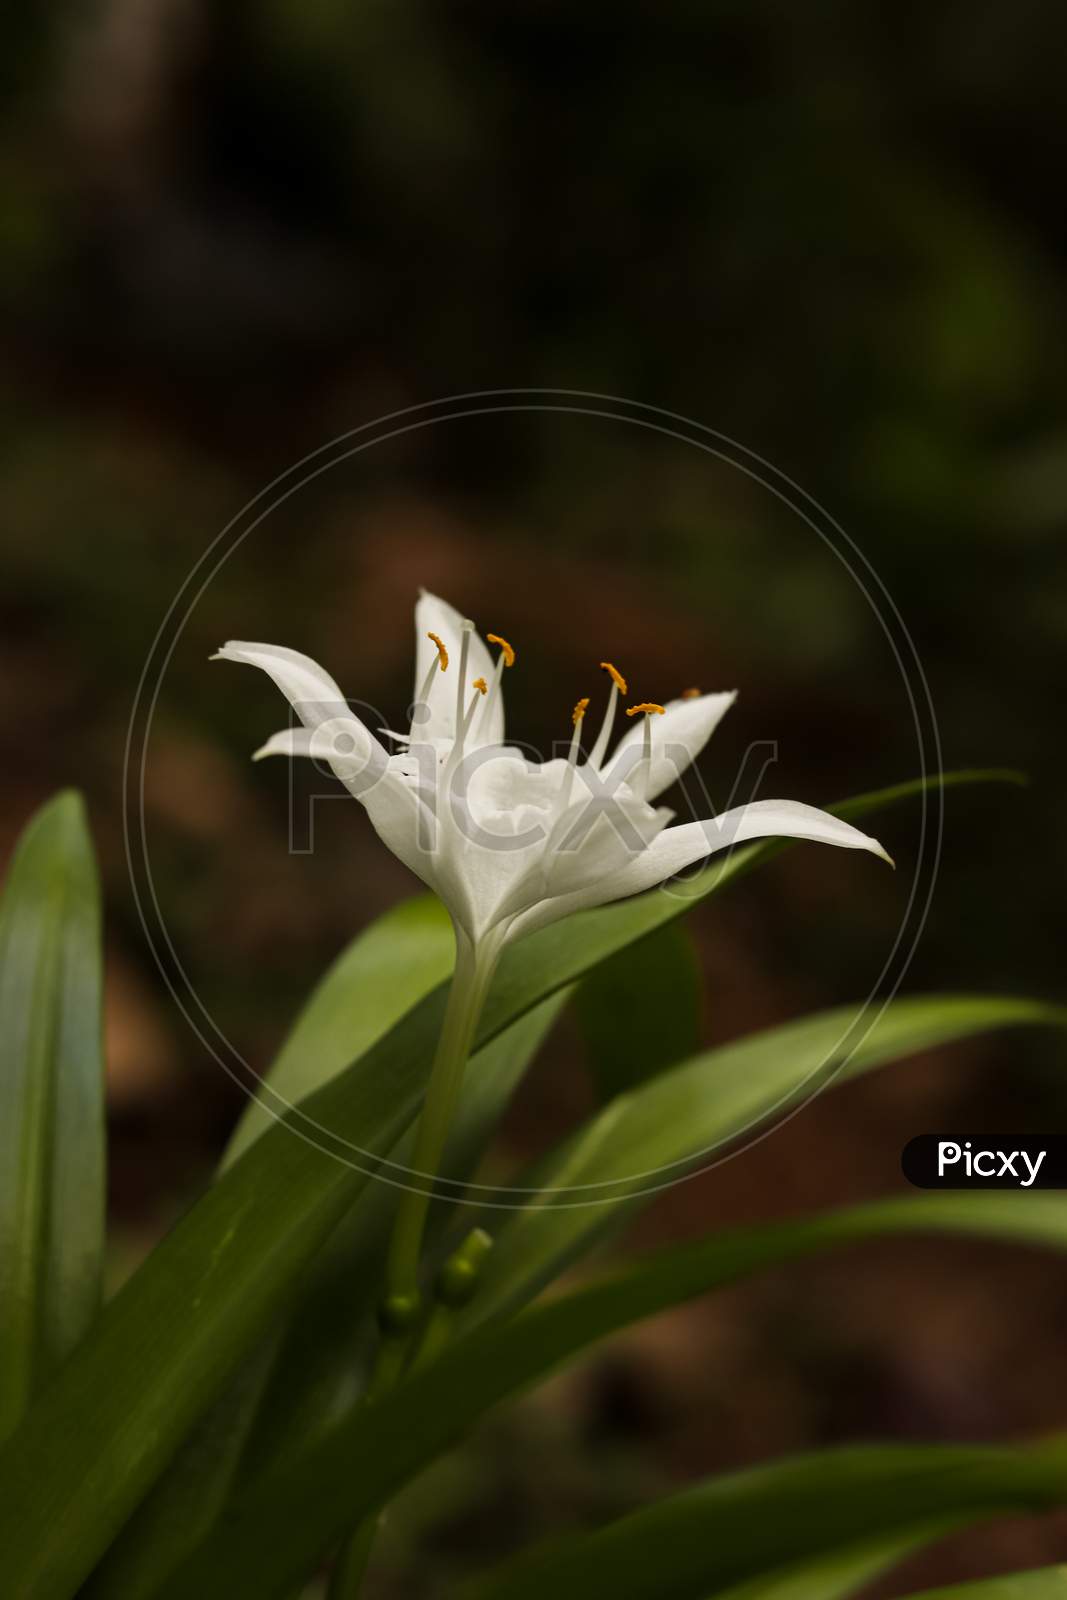 Beautiful Lily Flower On Green Leaves Background. Lilium Longiflorum Flowers In The Garden.